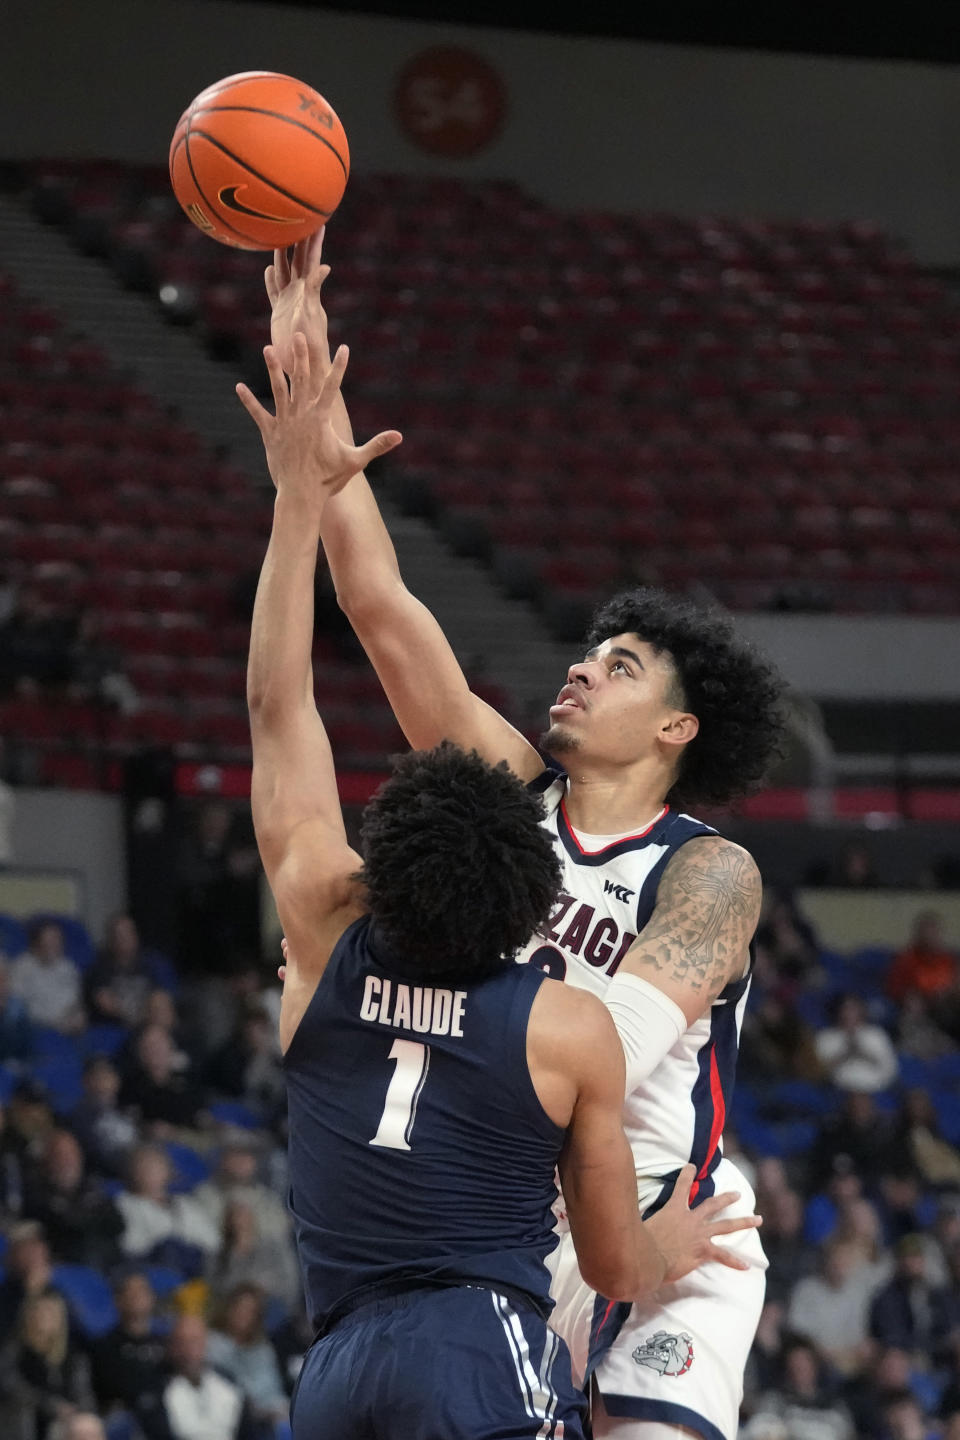 Gonzaga guard Julian Strawther, right, goes to the basket as Xavier guard Desmond Claude (1) defends during the first half of an NCAA college basketball game in the Phil Knight Legacy tournament Sunday, Nov. 27, 2022, in Portland, Ore. (AP Photo/Rick Bowmer)